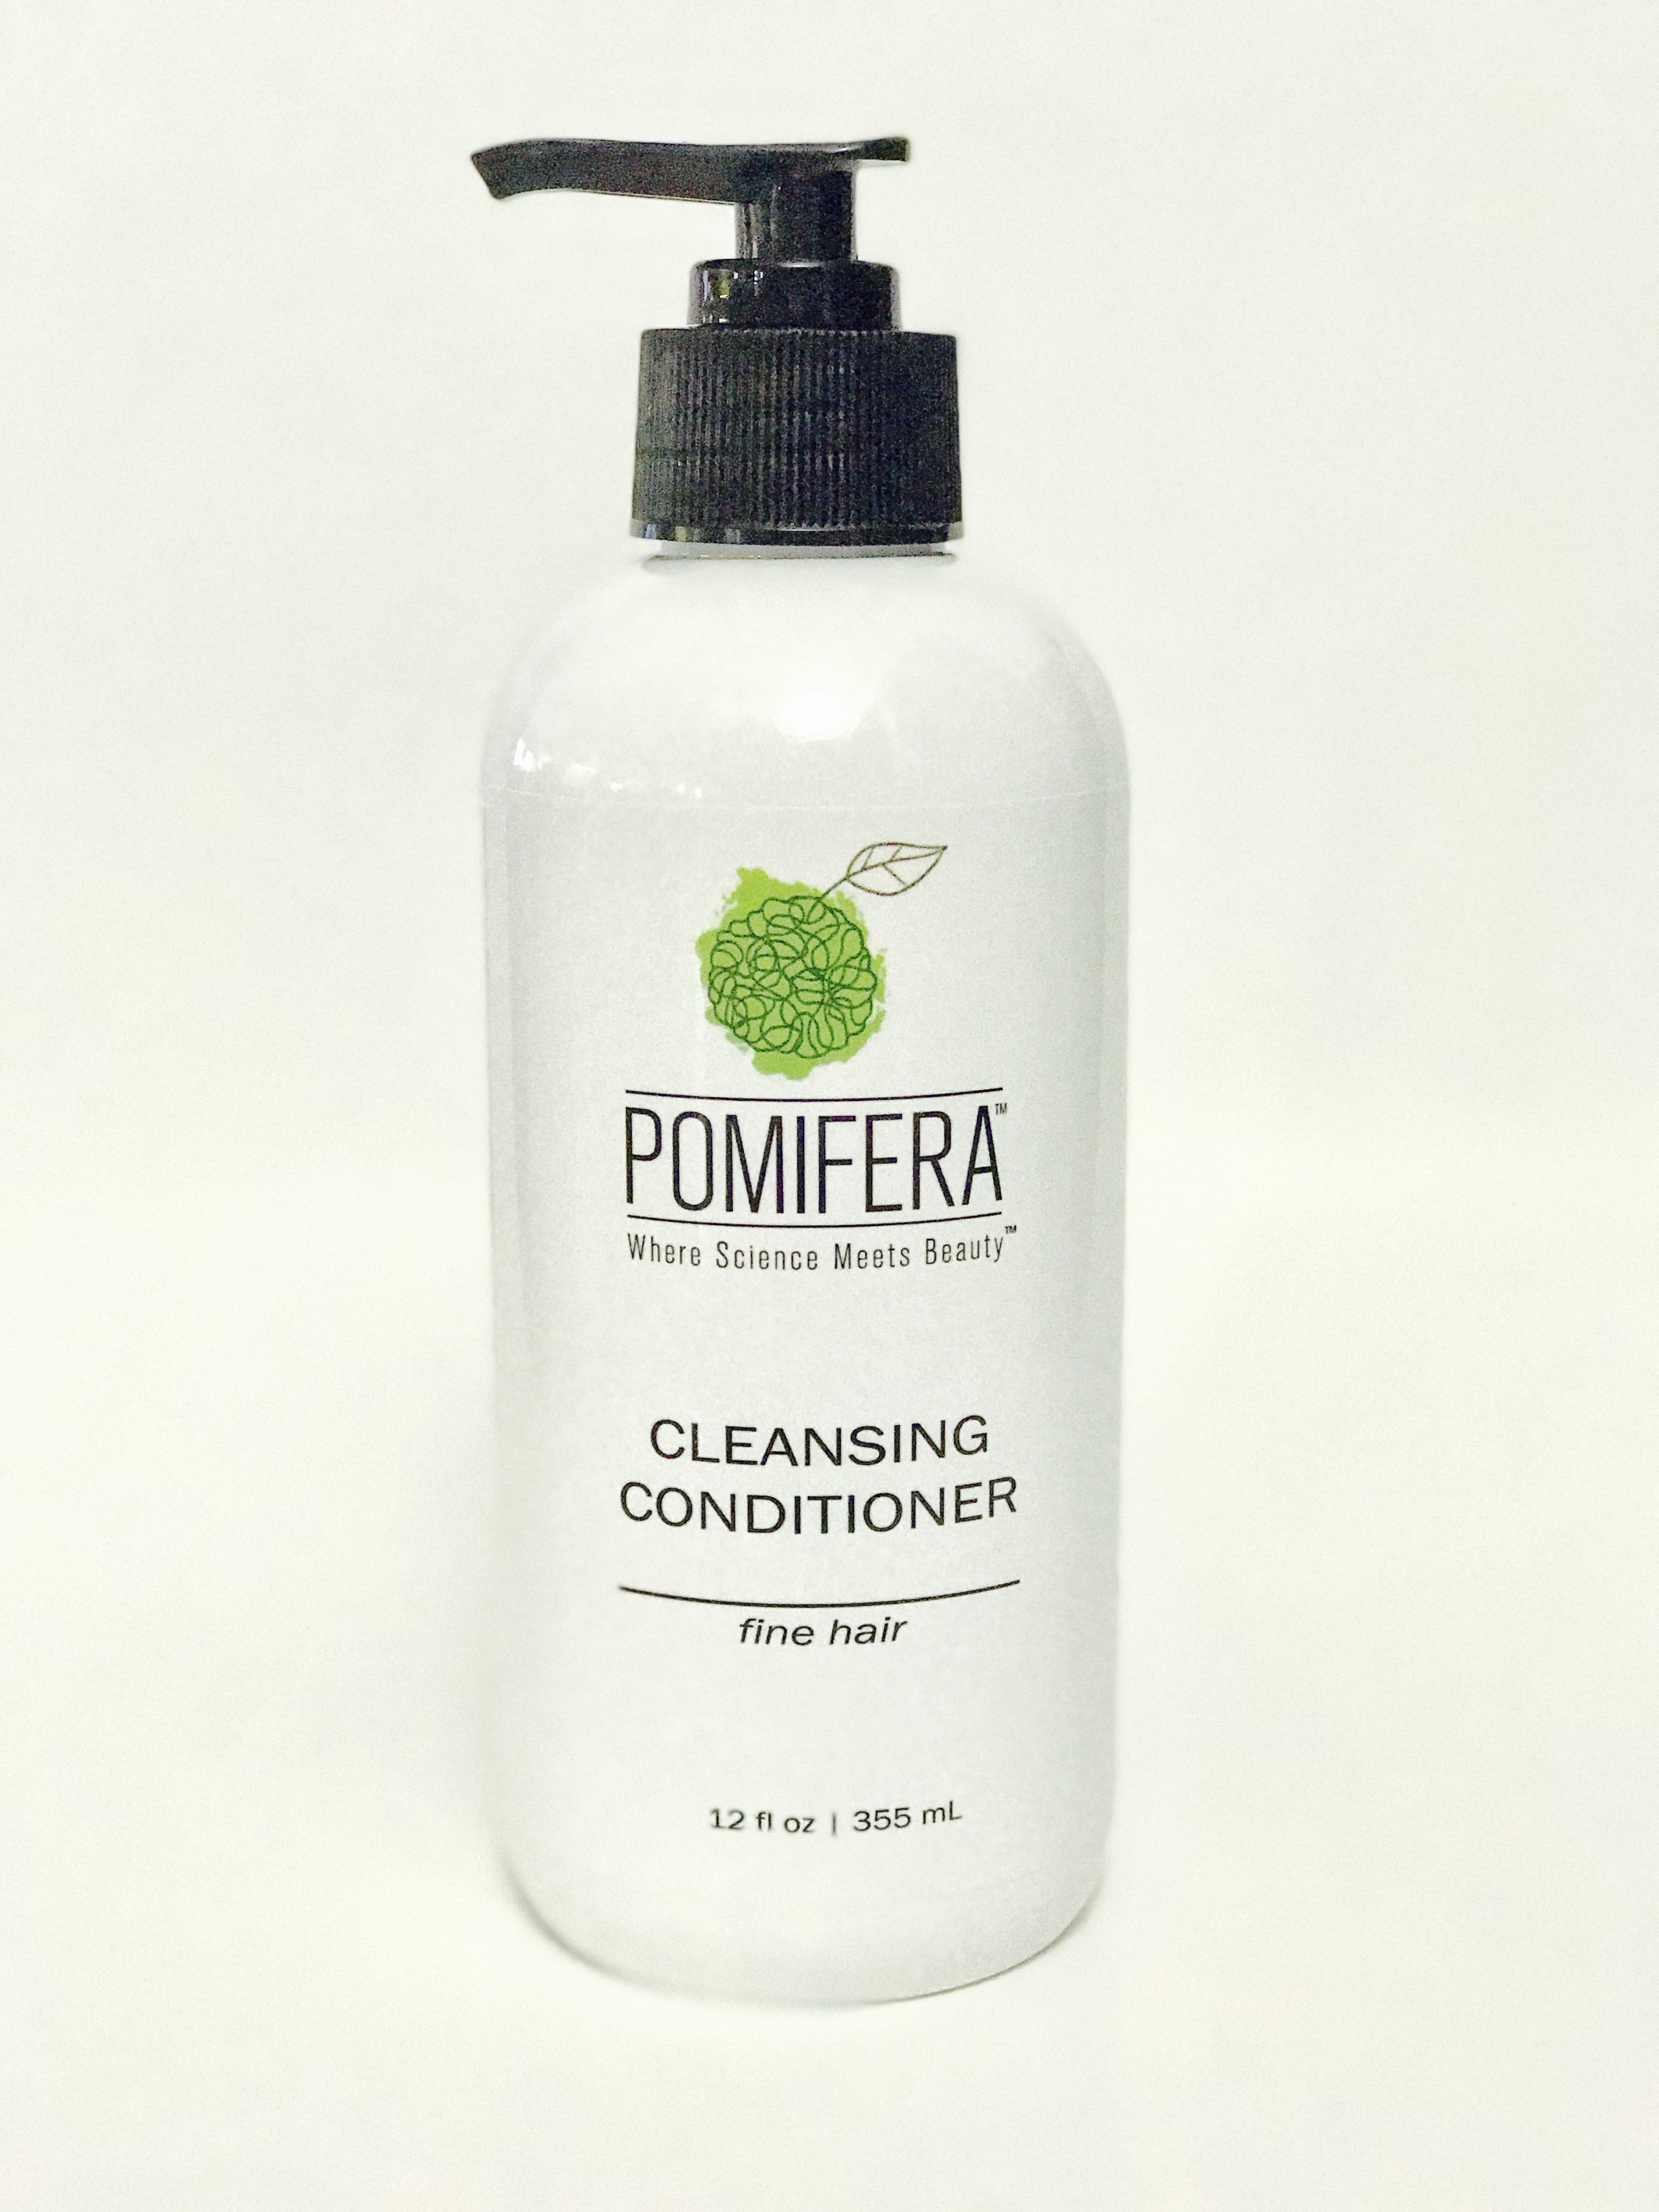 Pomifera Cleansing Conditioner for Fine Hair (12 oz) | Pomifera Online  Store has moved to: